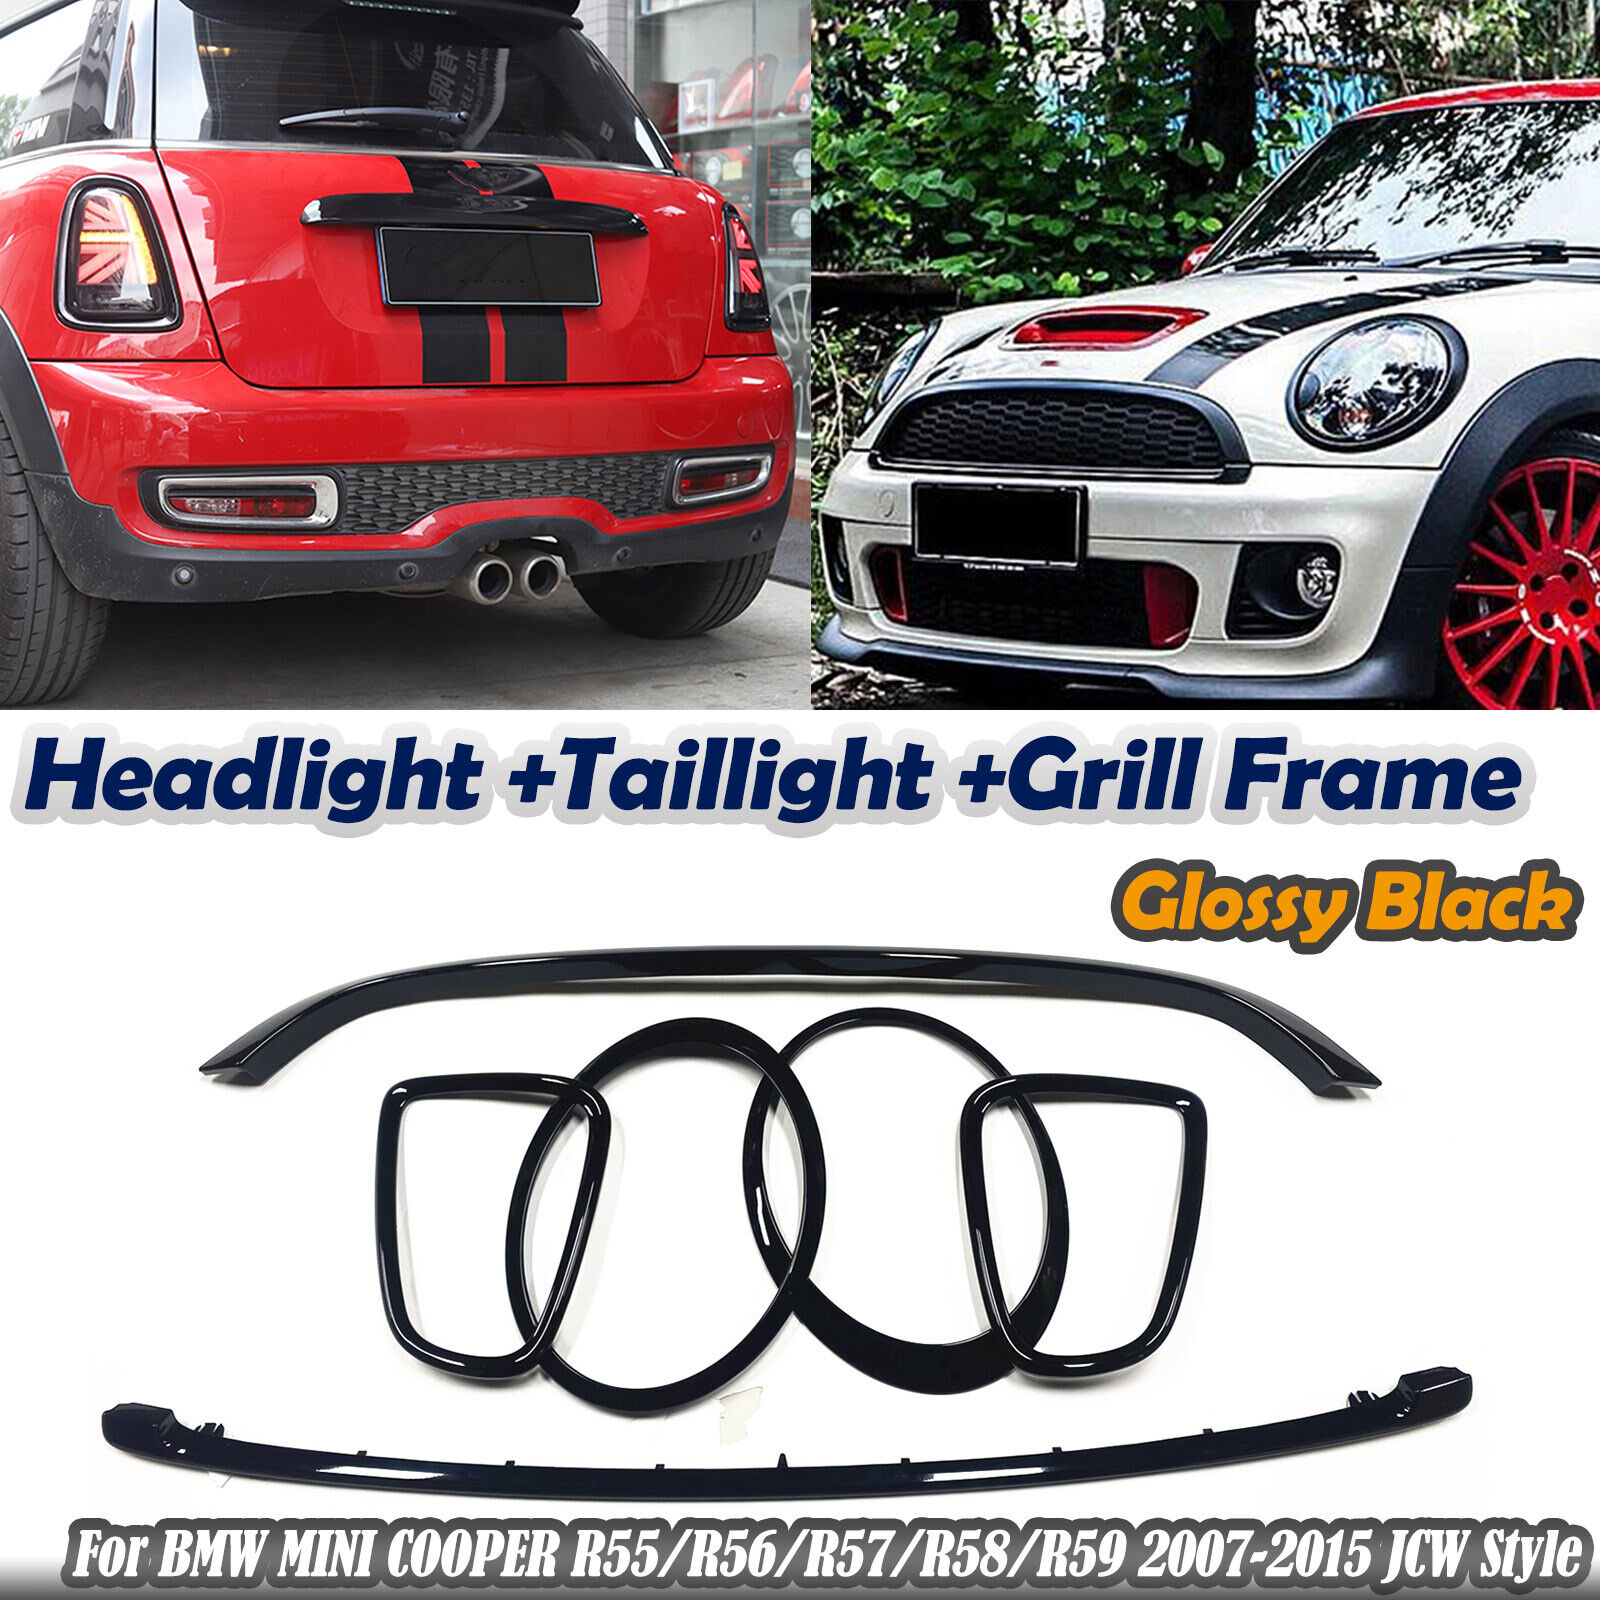 Front+Rear Light Eyelid Frame Grille Trim For MINI COOPER R55/R56/R57 JCW Style